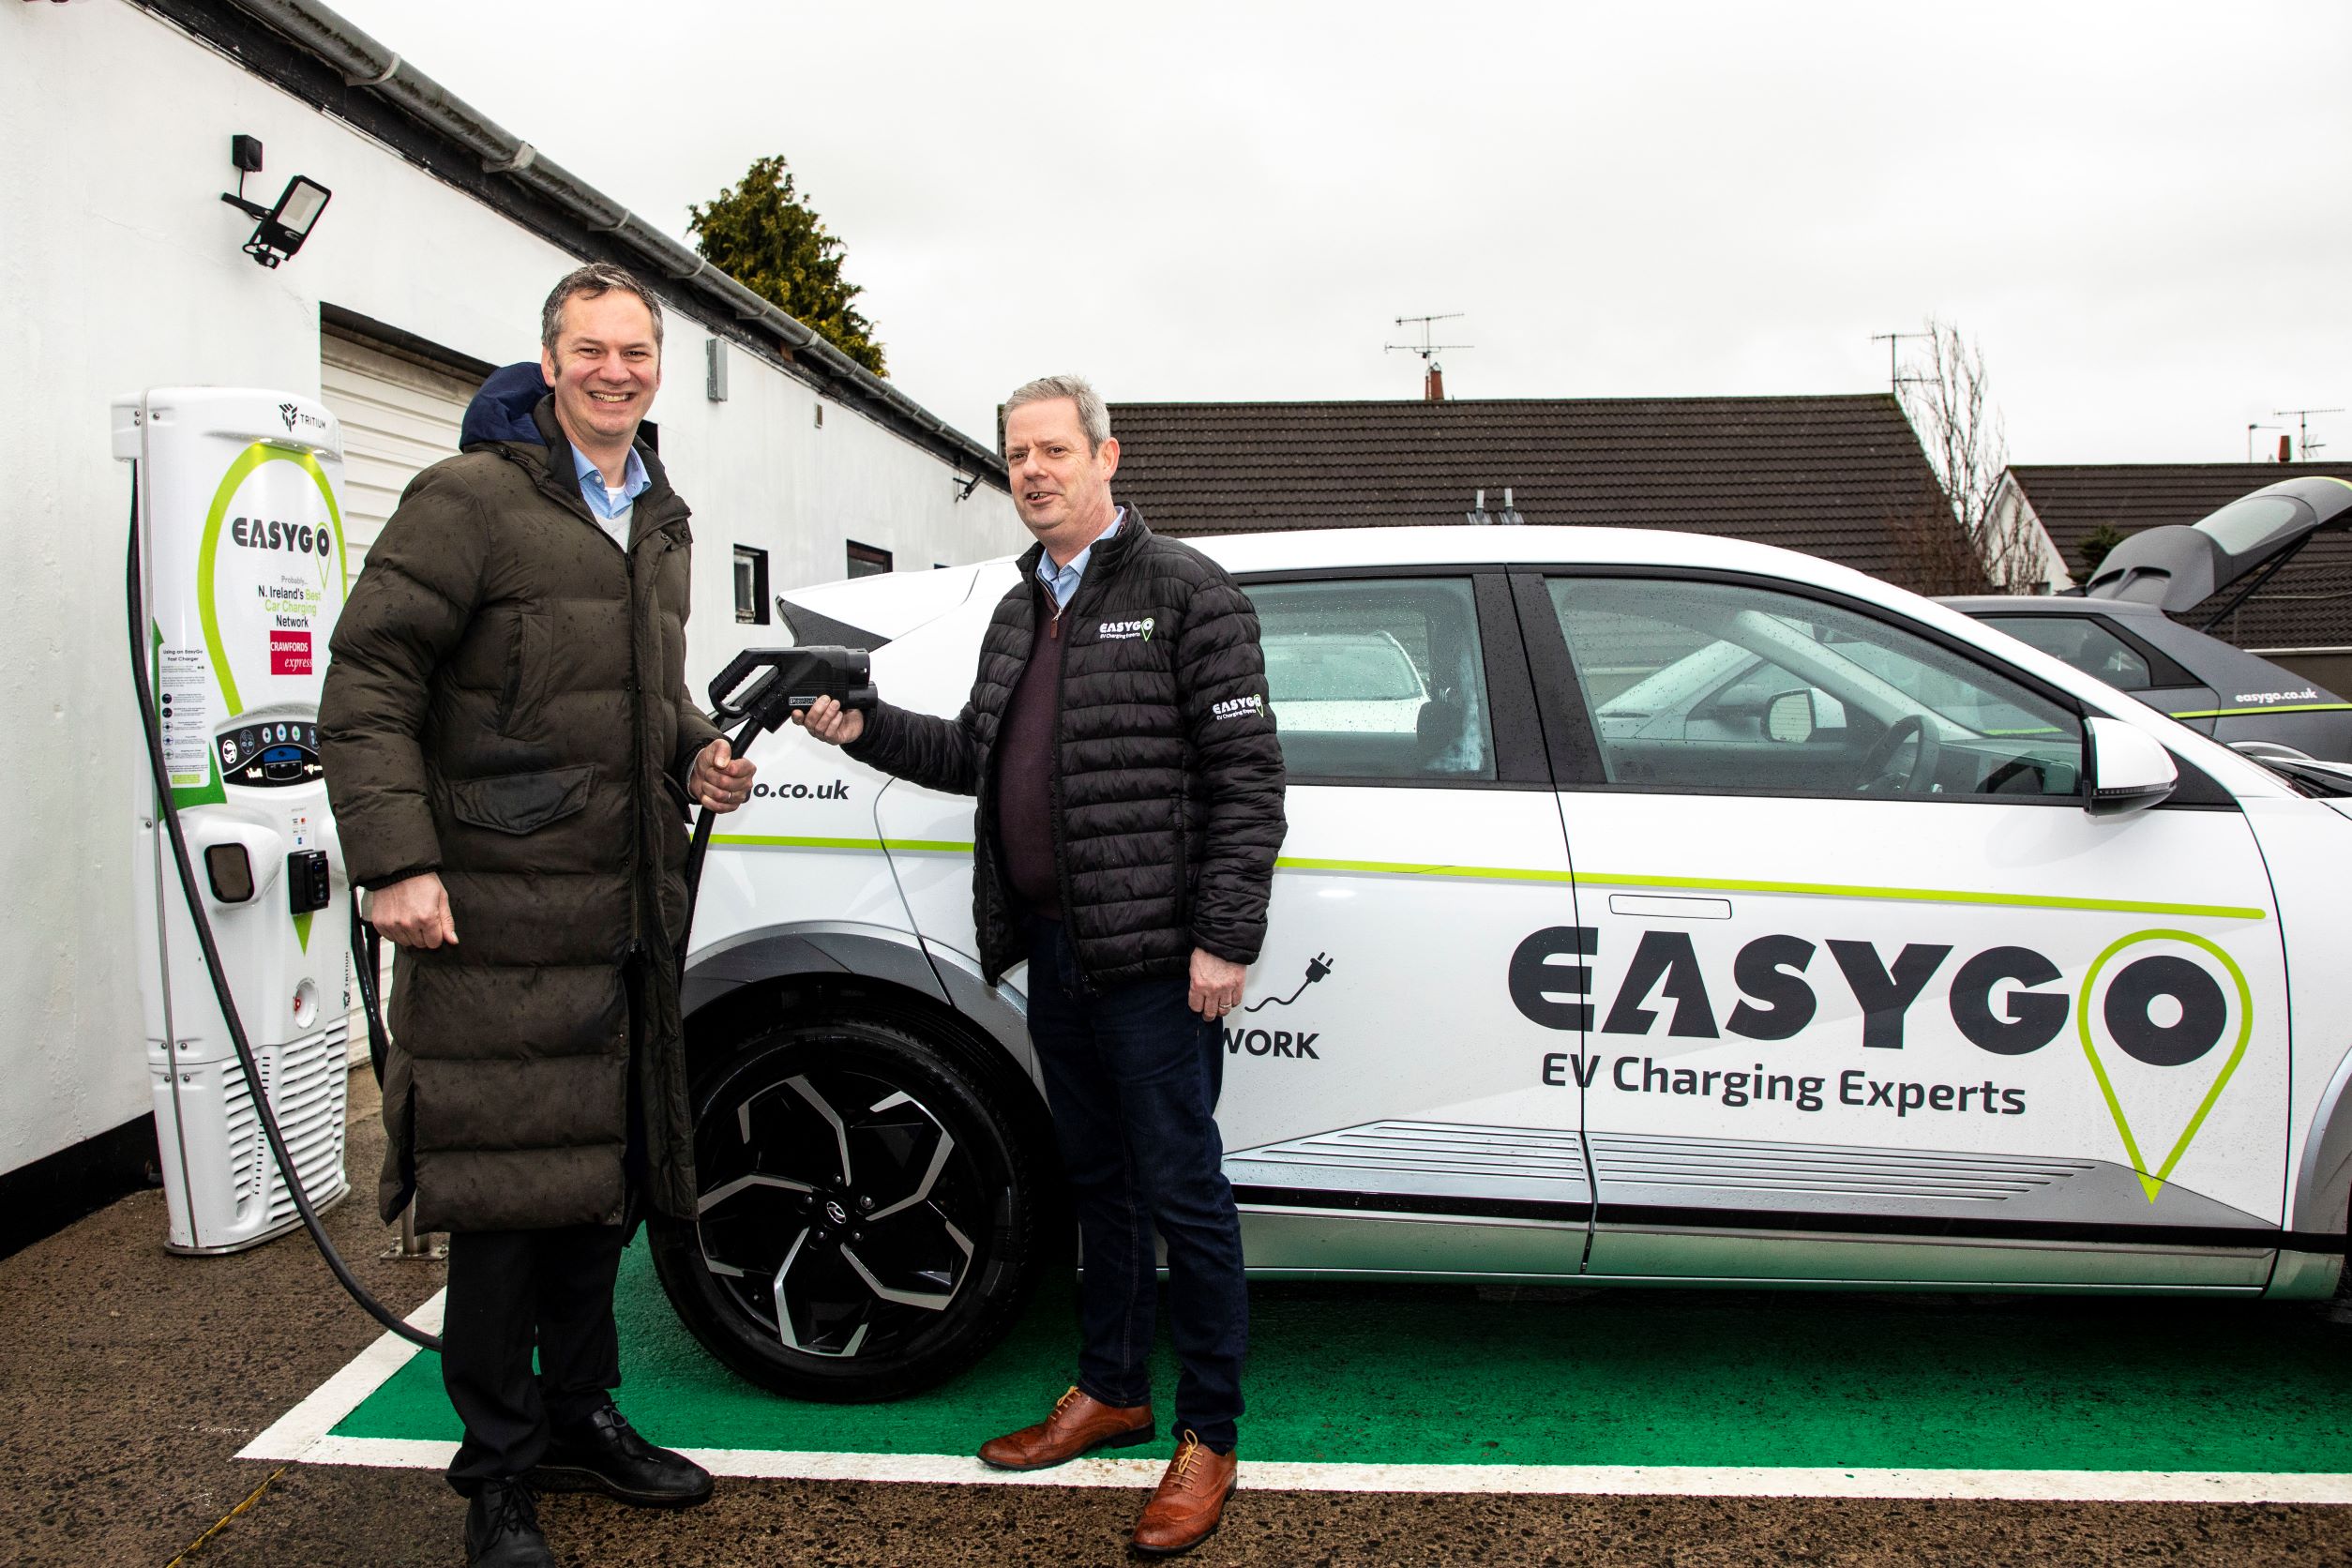 New EasyGo charger at Crawfords Express. Robert Crawford and Stephen Kelly pictured.